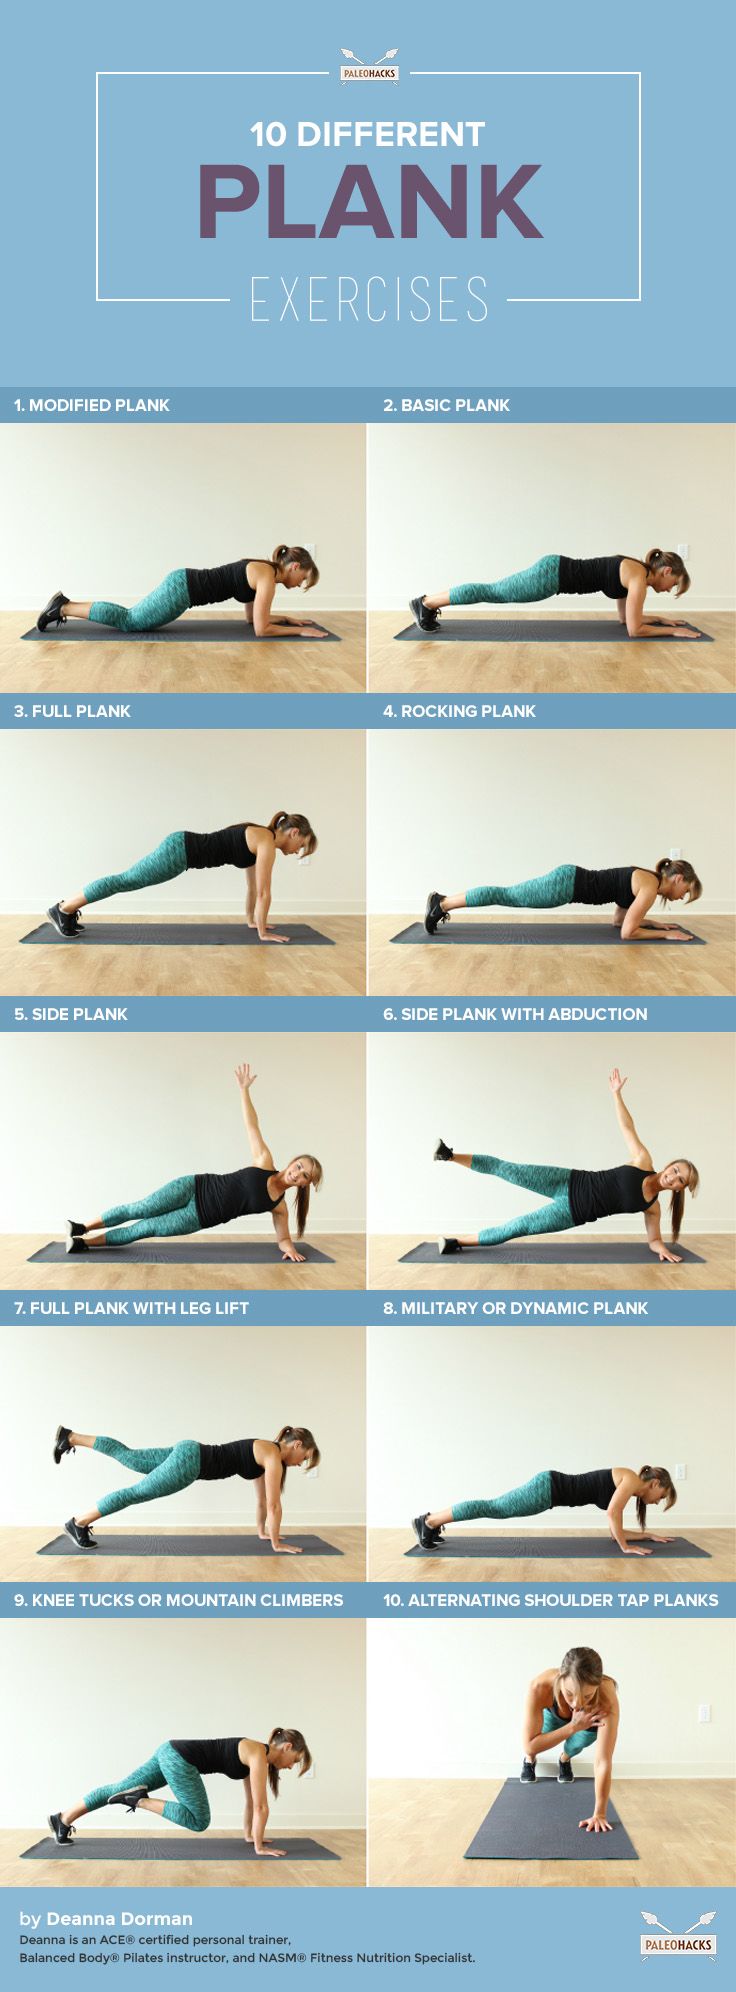 Plank Workouts